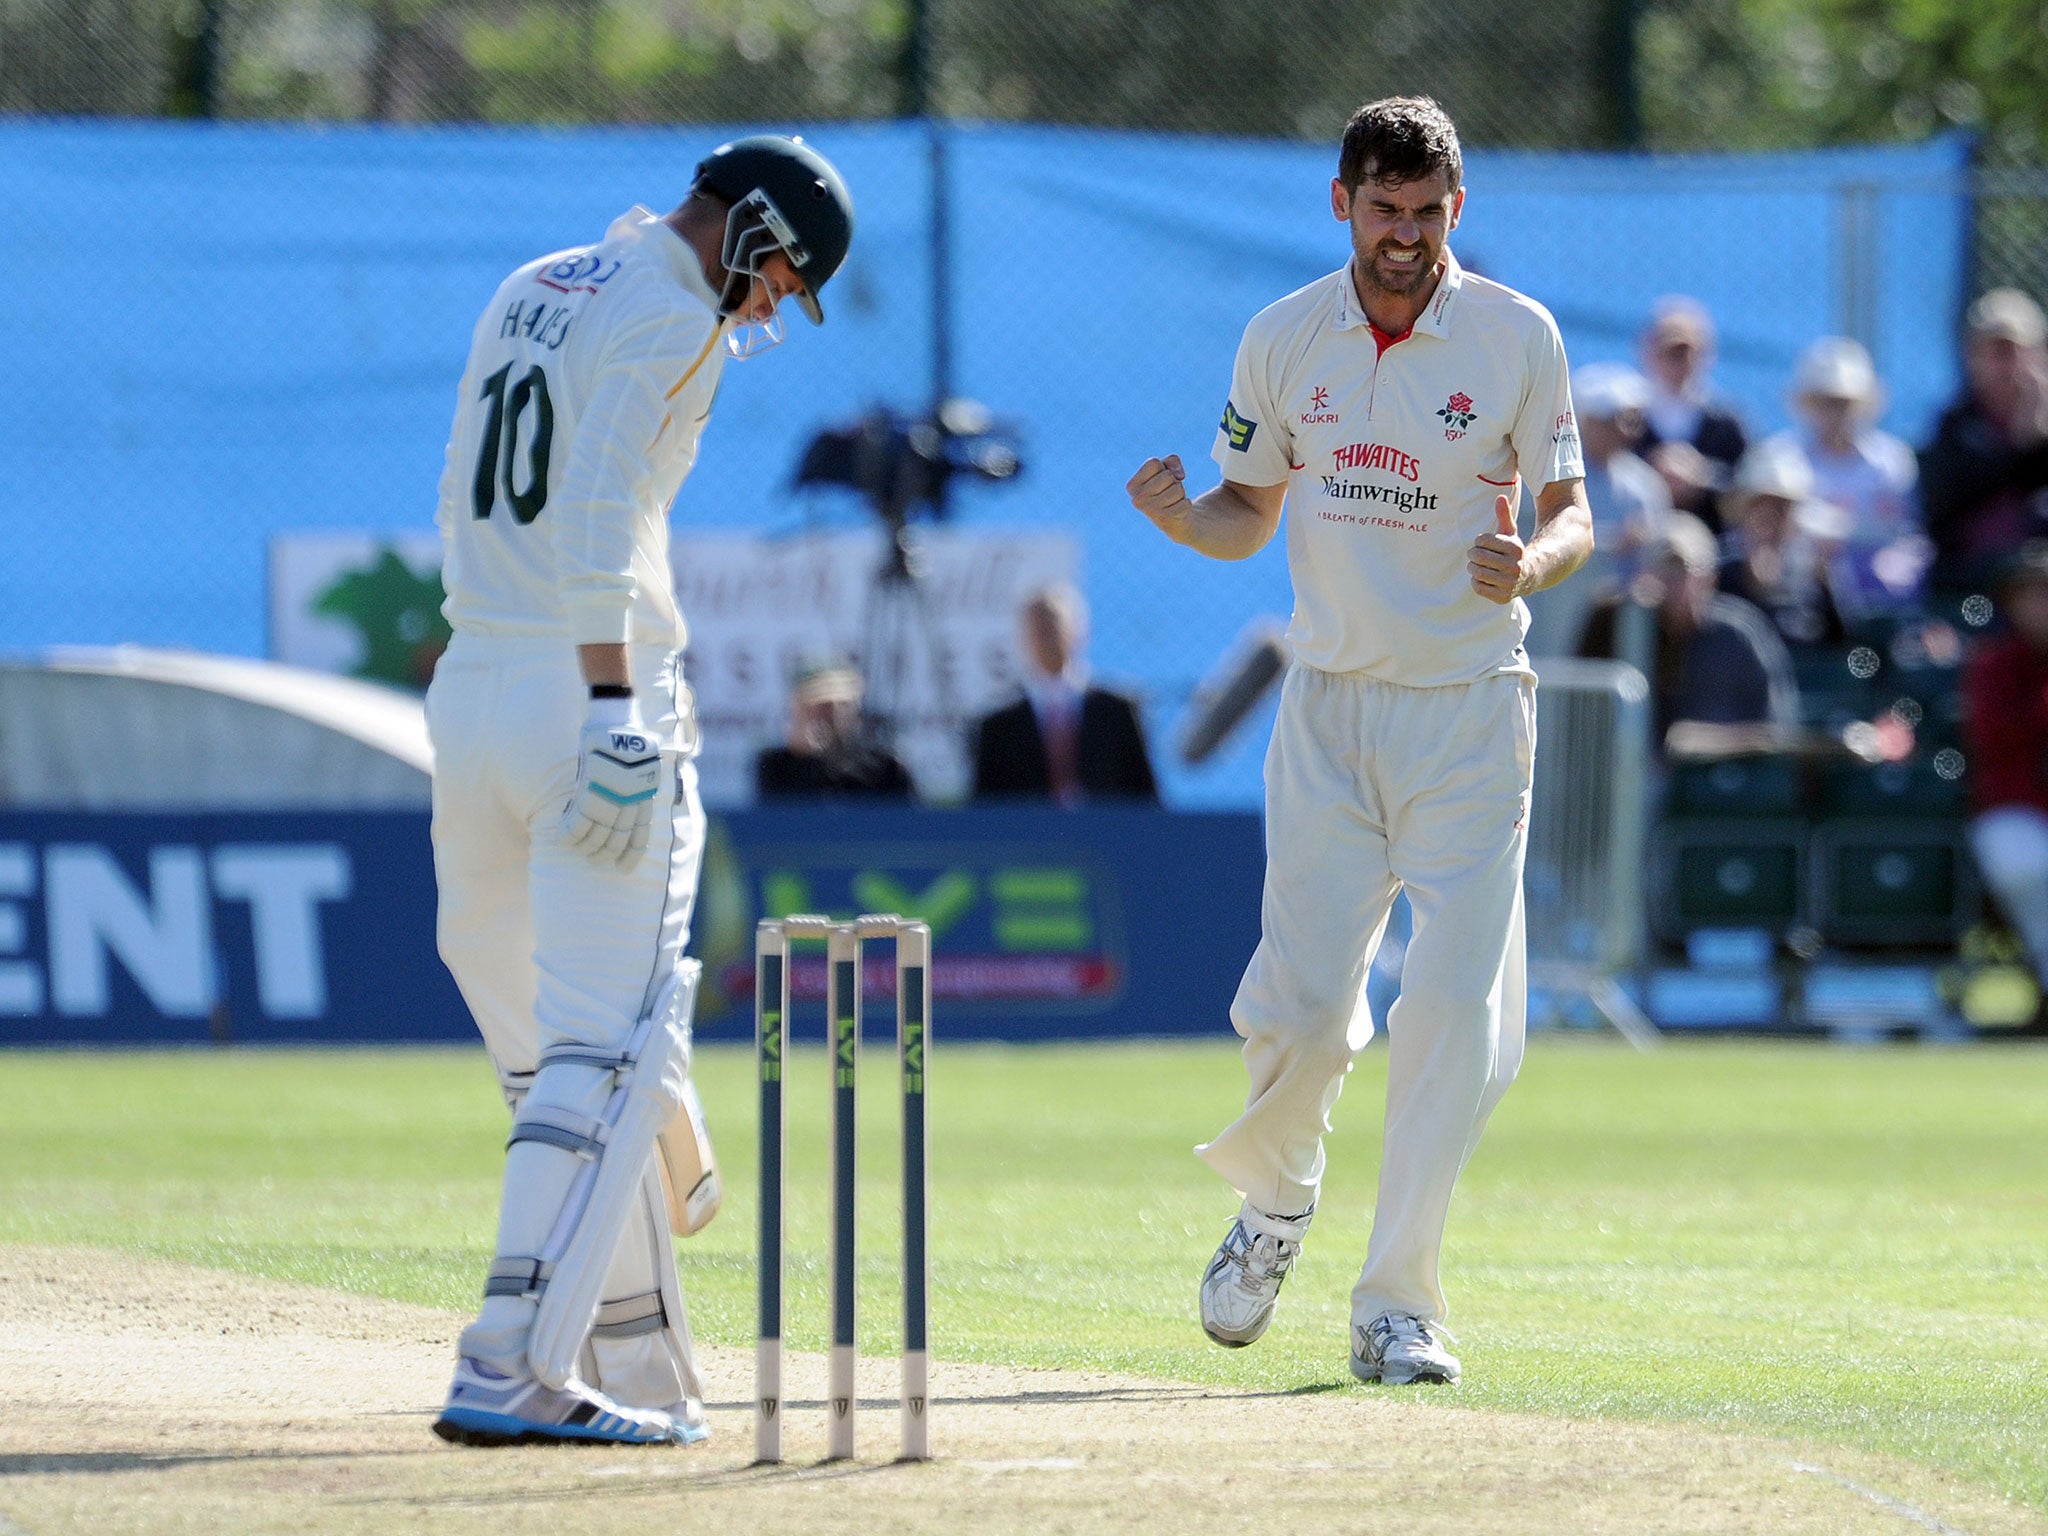 Lancashire all-rounder Kyle Hogg celebrates the wicket of Alex Hales earlier this year